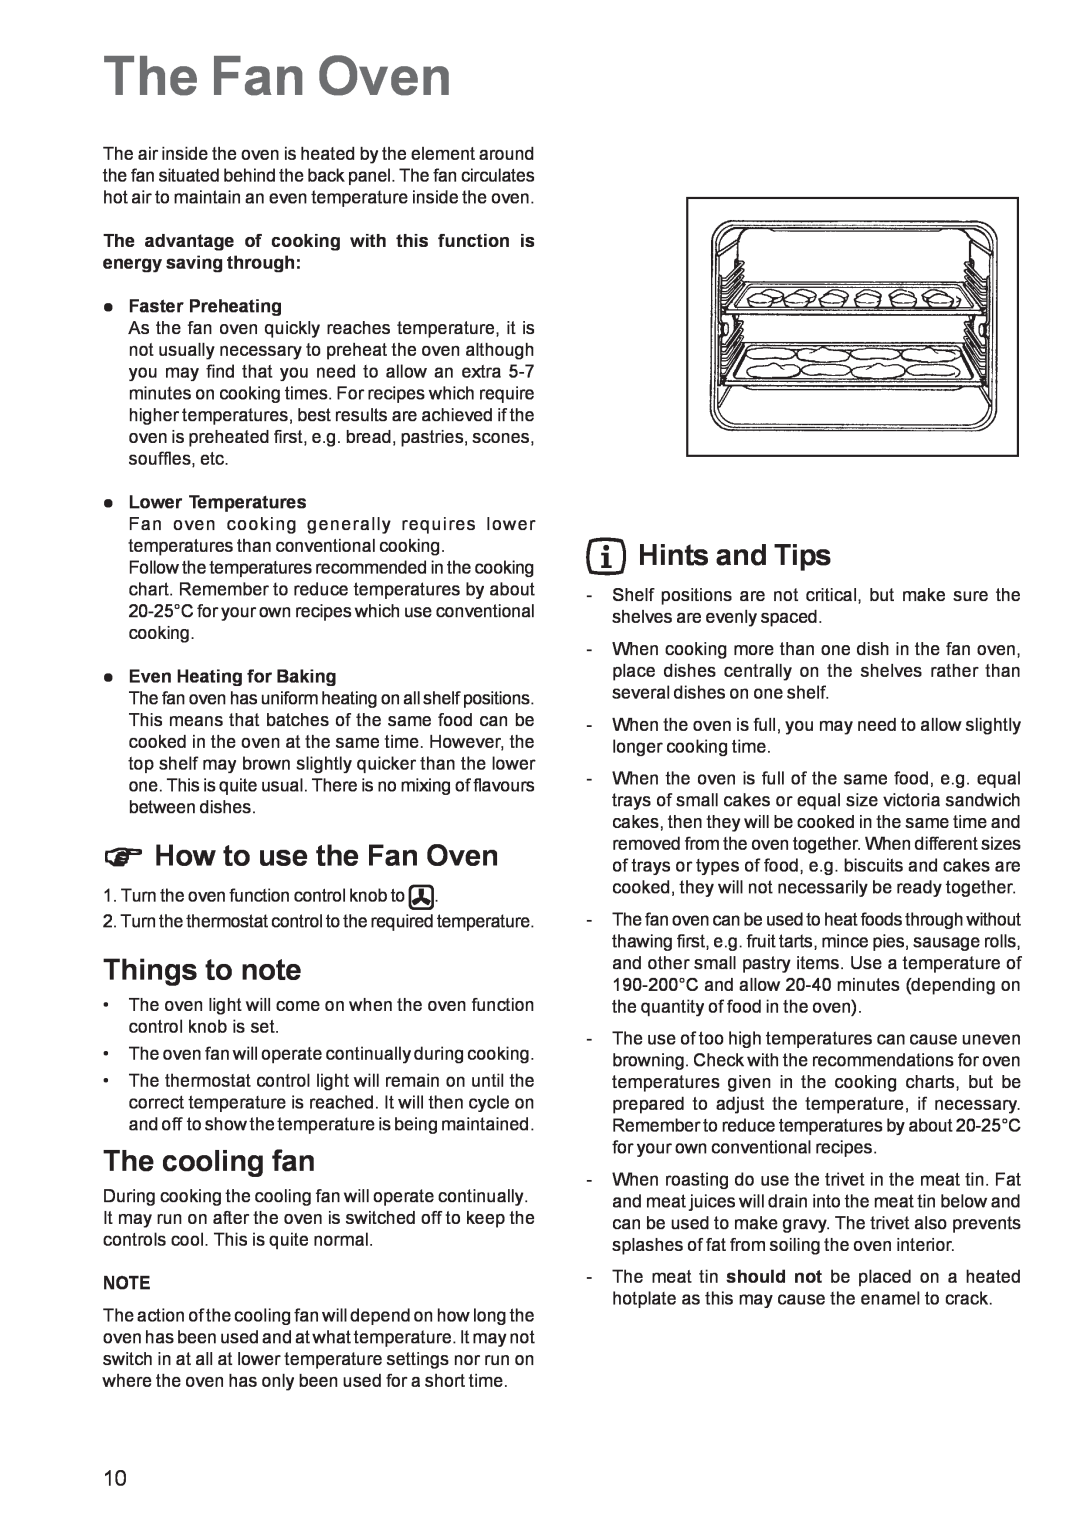 Zanussi ZBF 560 manual The Fan Oven, How to use the Fan Oven, Things to note, Hints and Tips, The cooling fan 